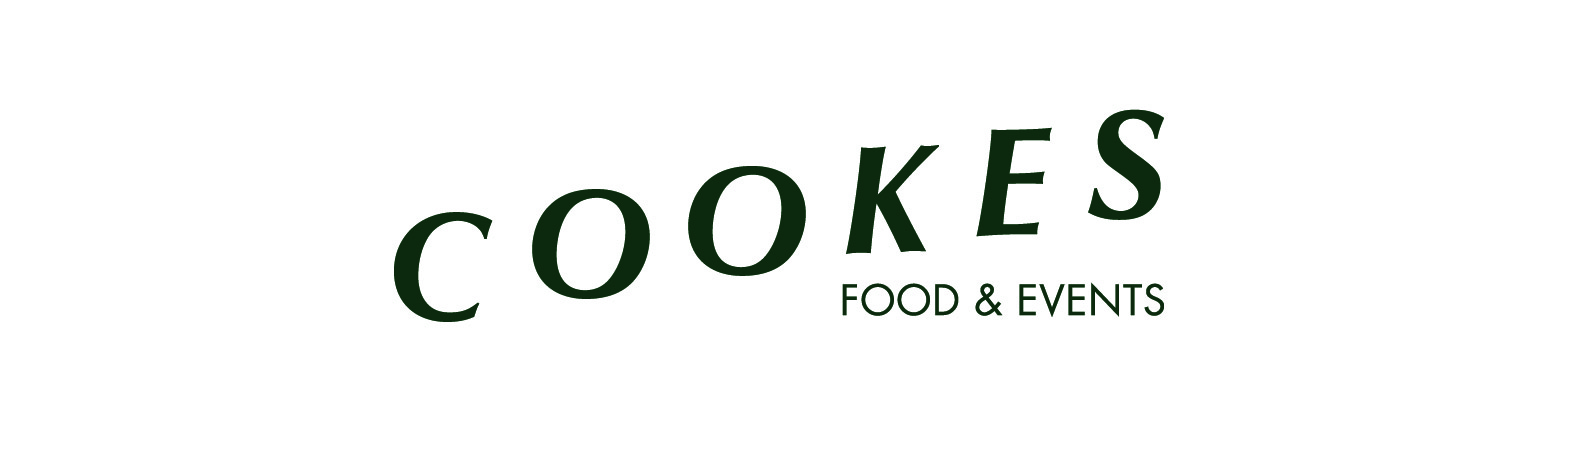 Cookes Food & Events